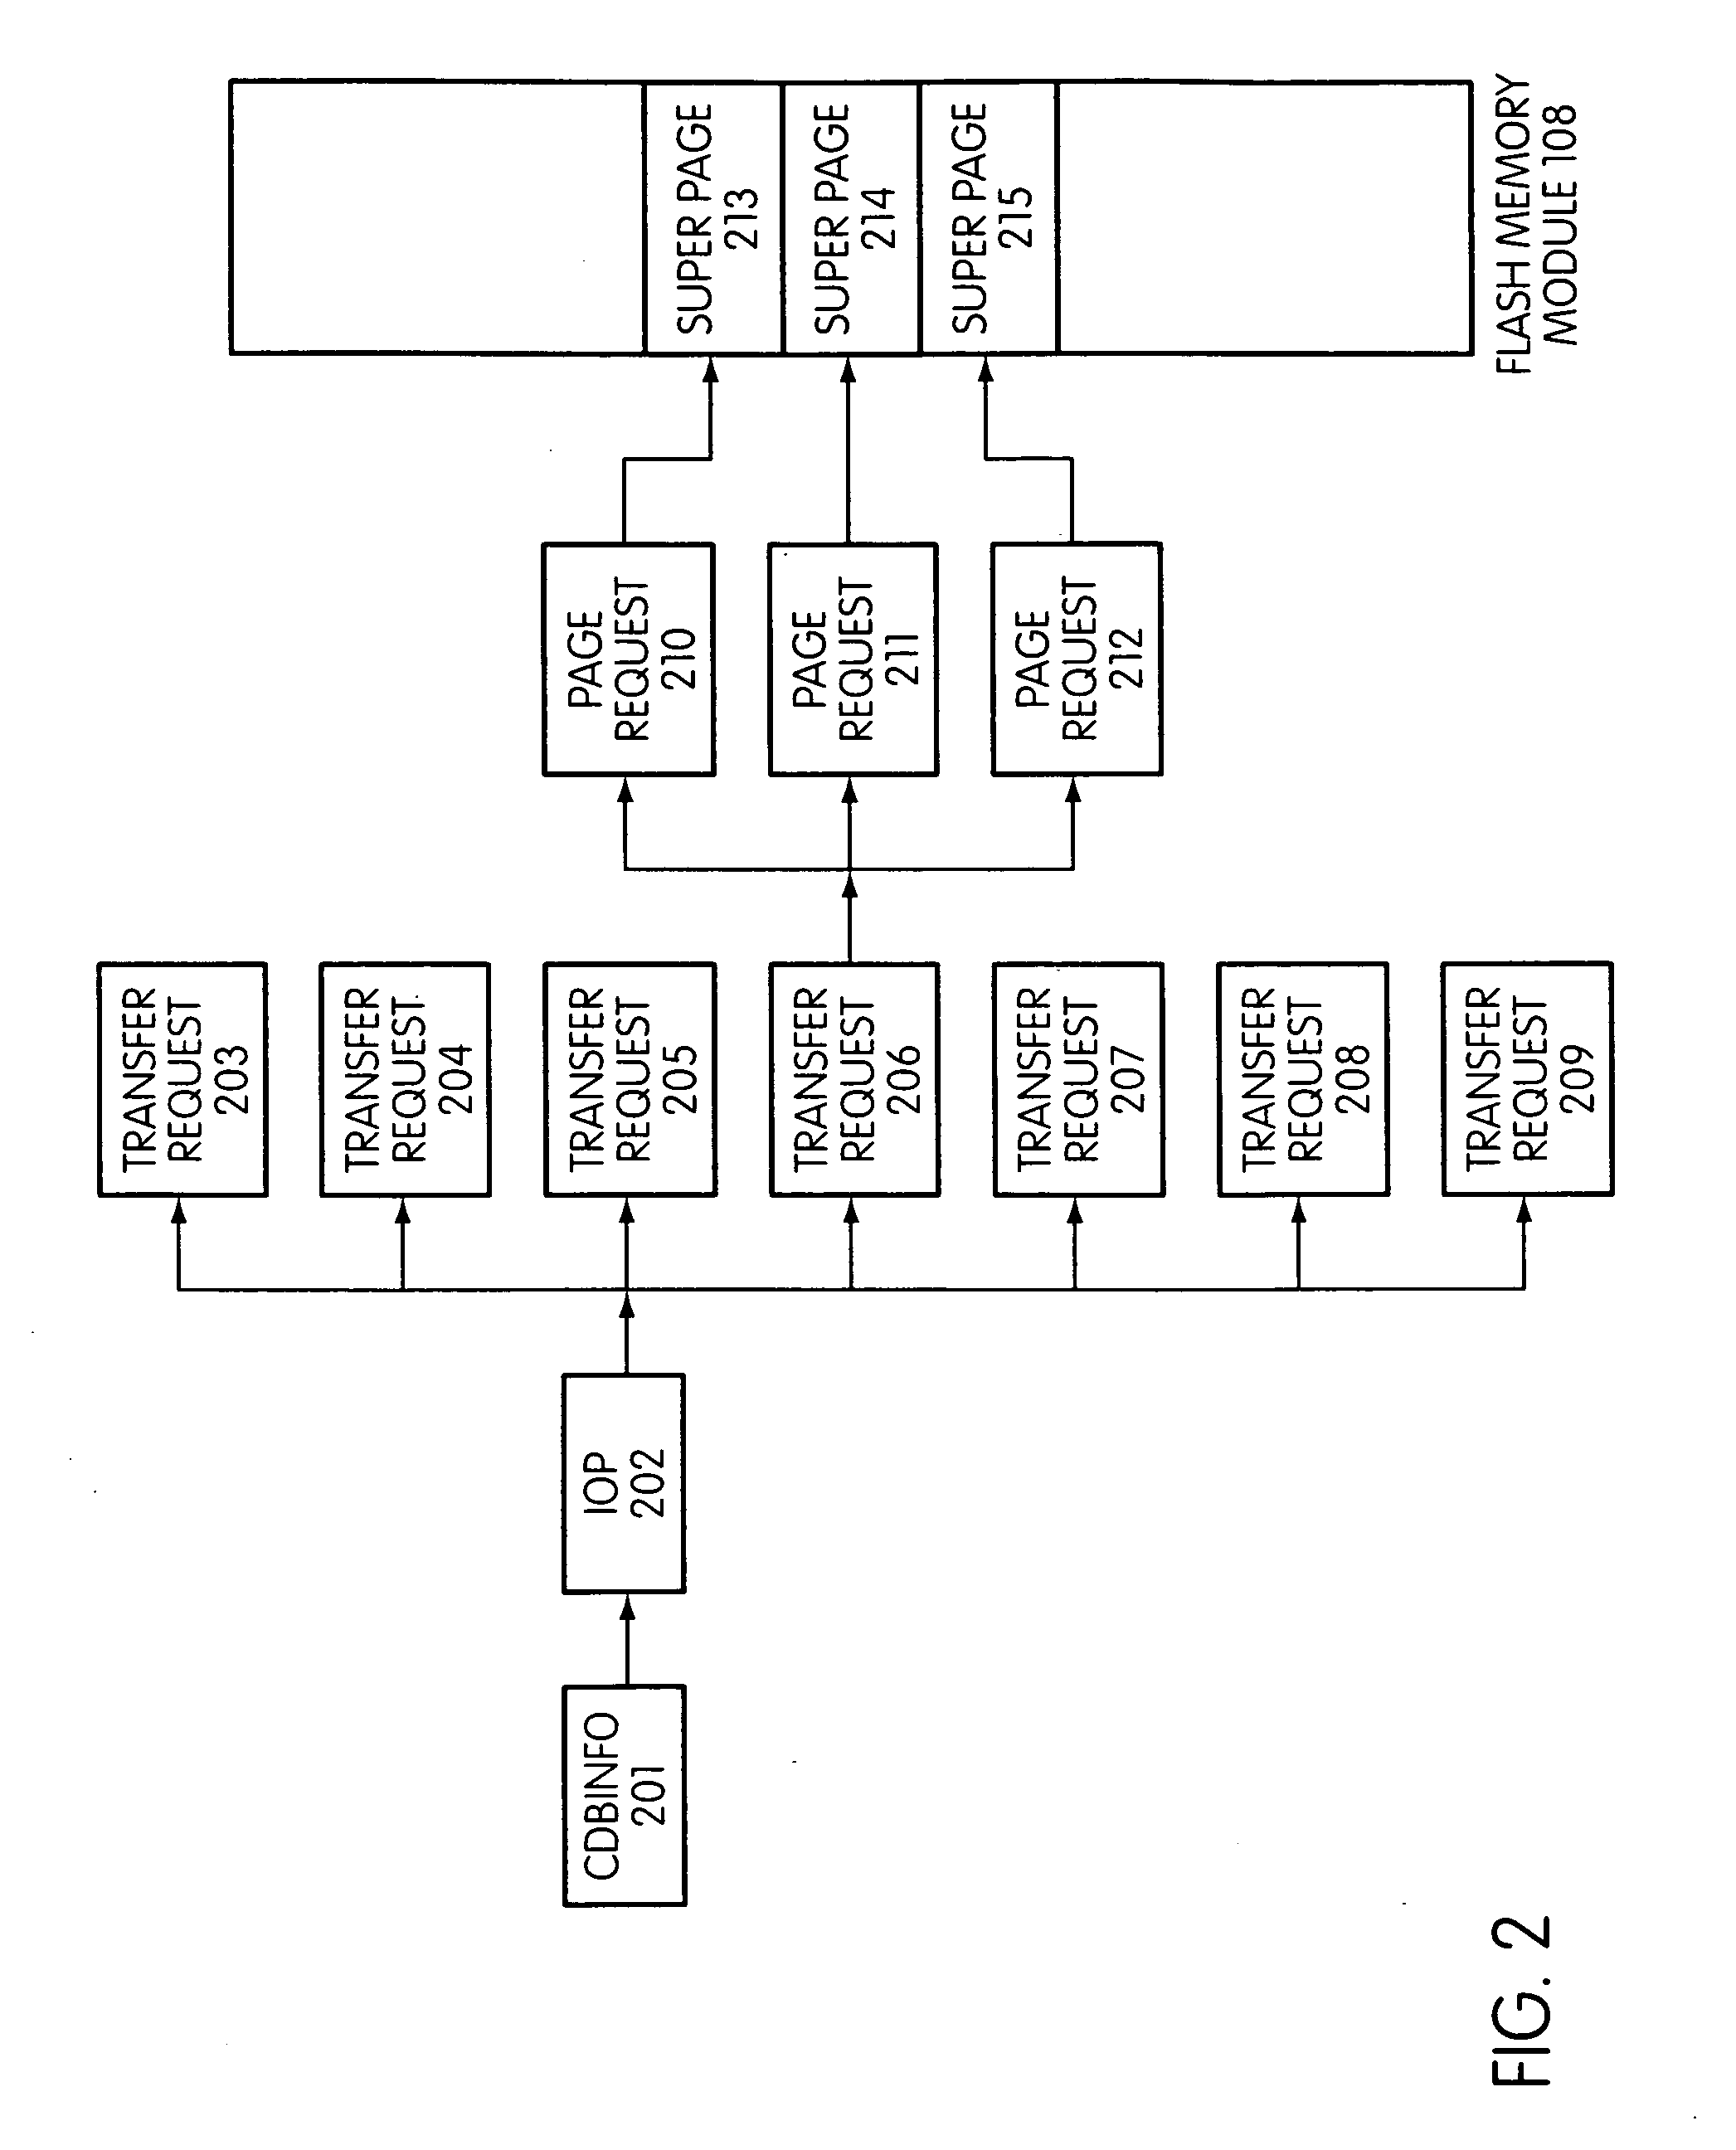 Storage controller for flash memory including a crossbar switch connecting a plurality of processors with a plurality of internal memories